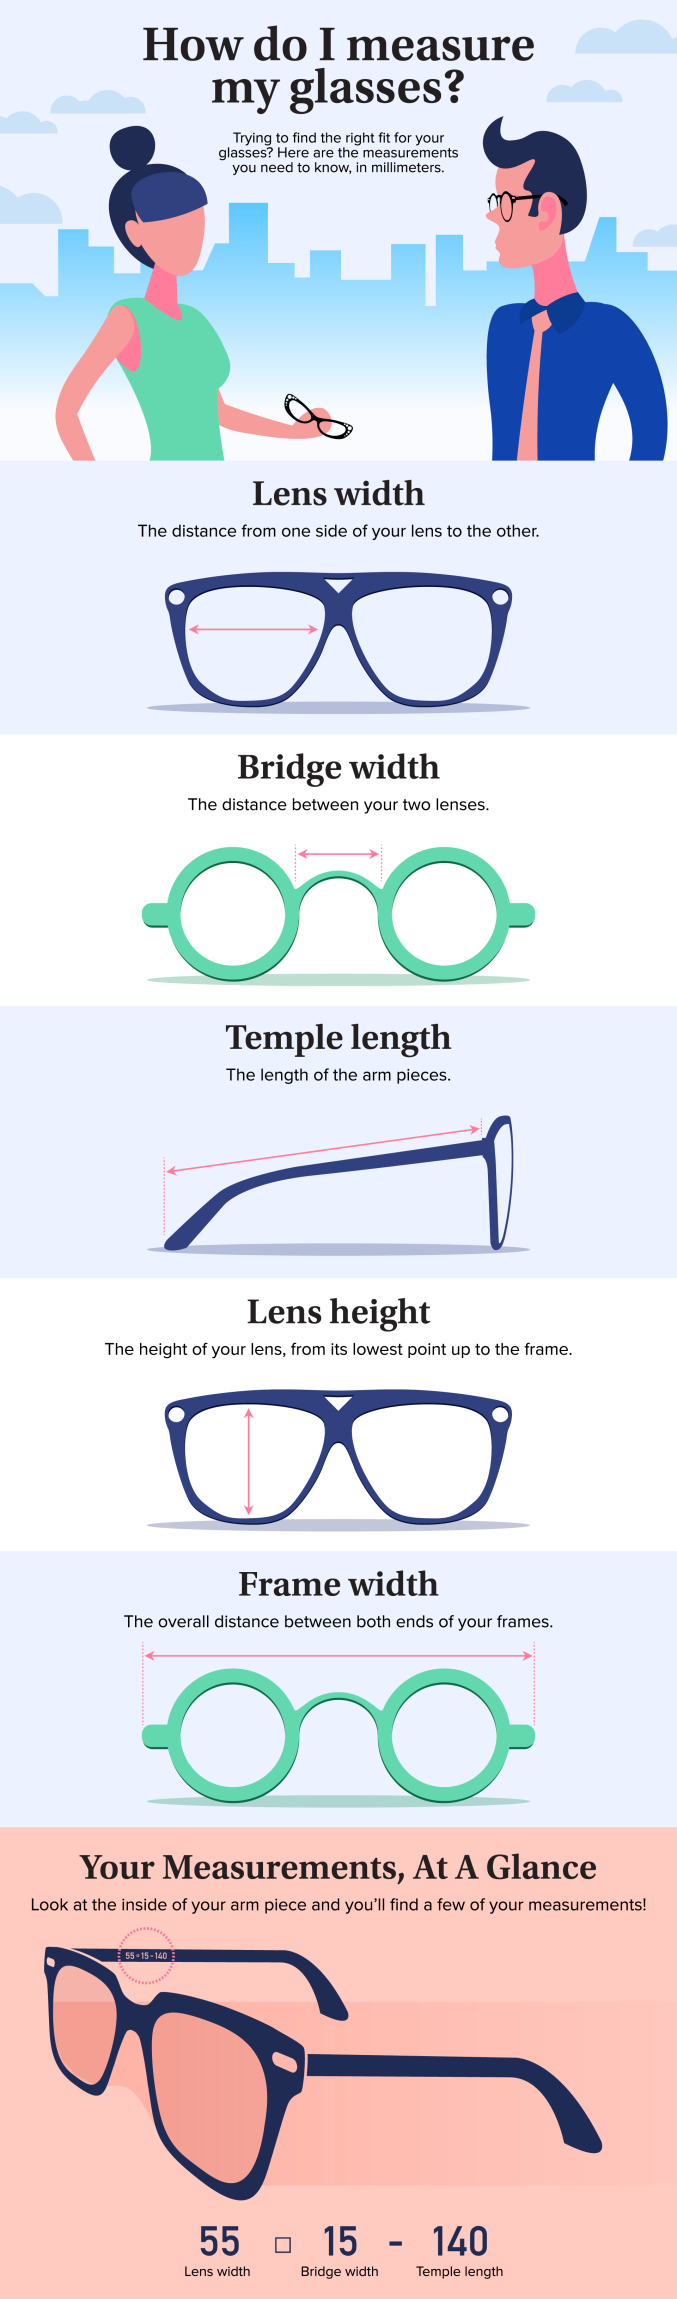 How do I measure my eyeglasses? - All About Vision